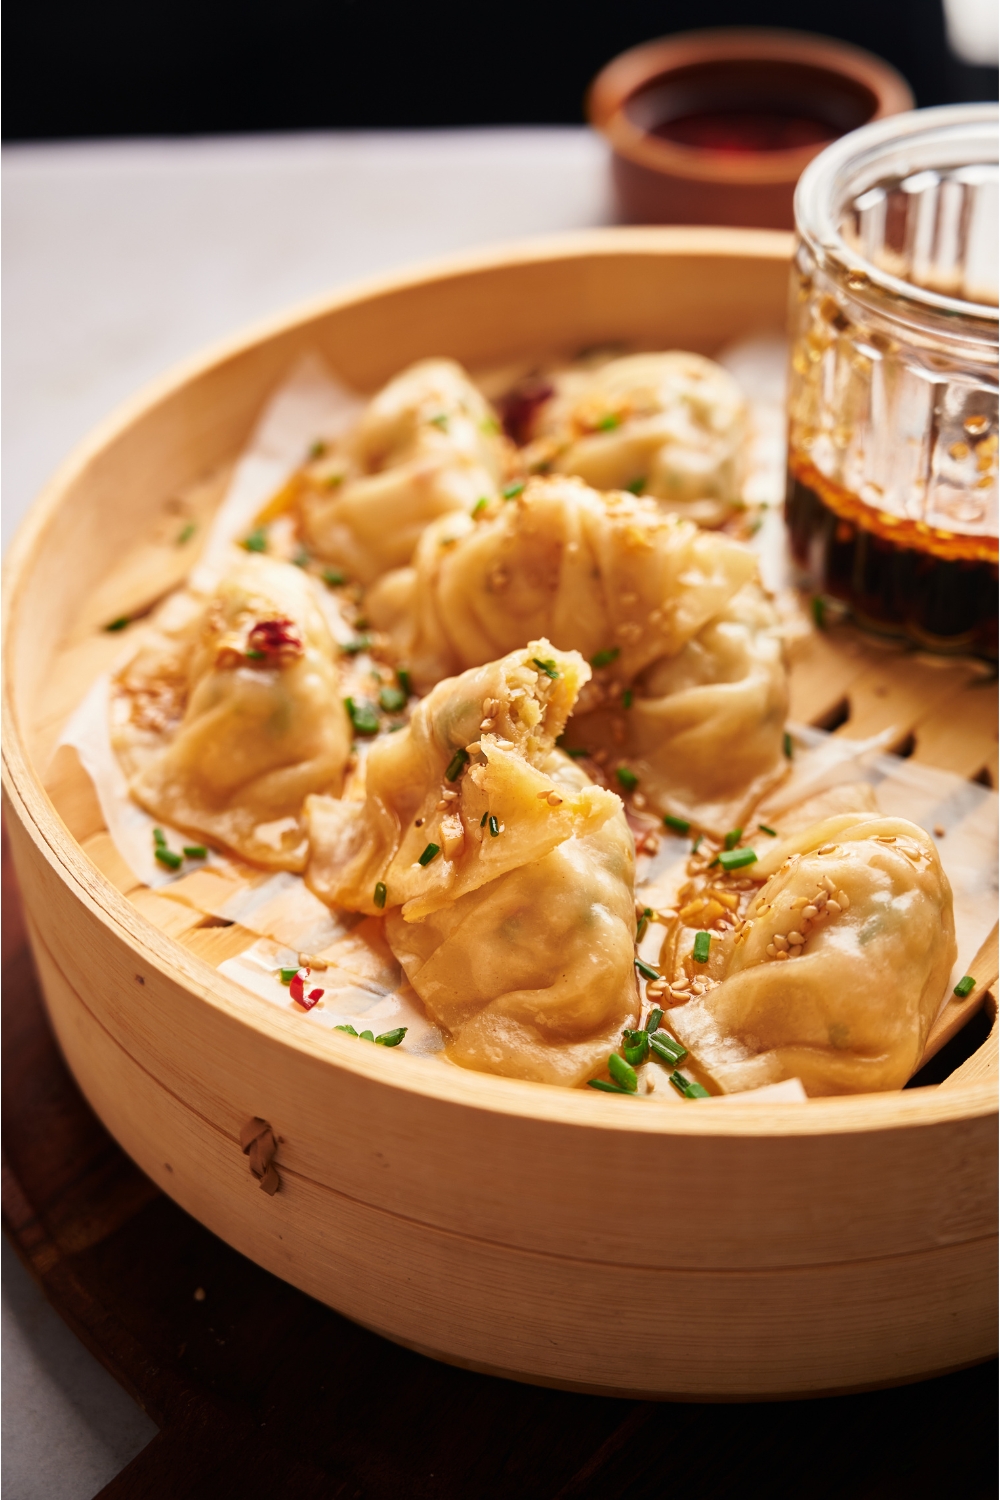 Steamed dumplings in a bamboo steamer on a wood board, garnished with green onion and sesame seeds.